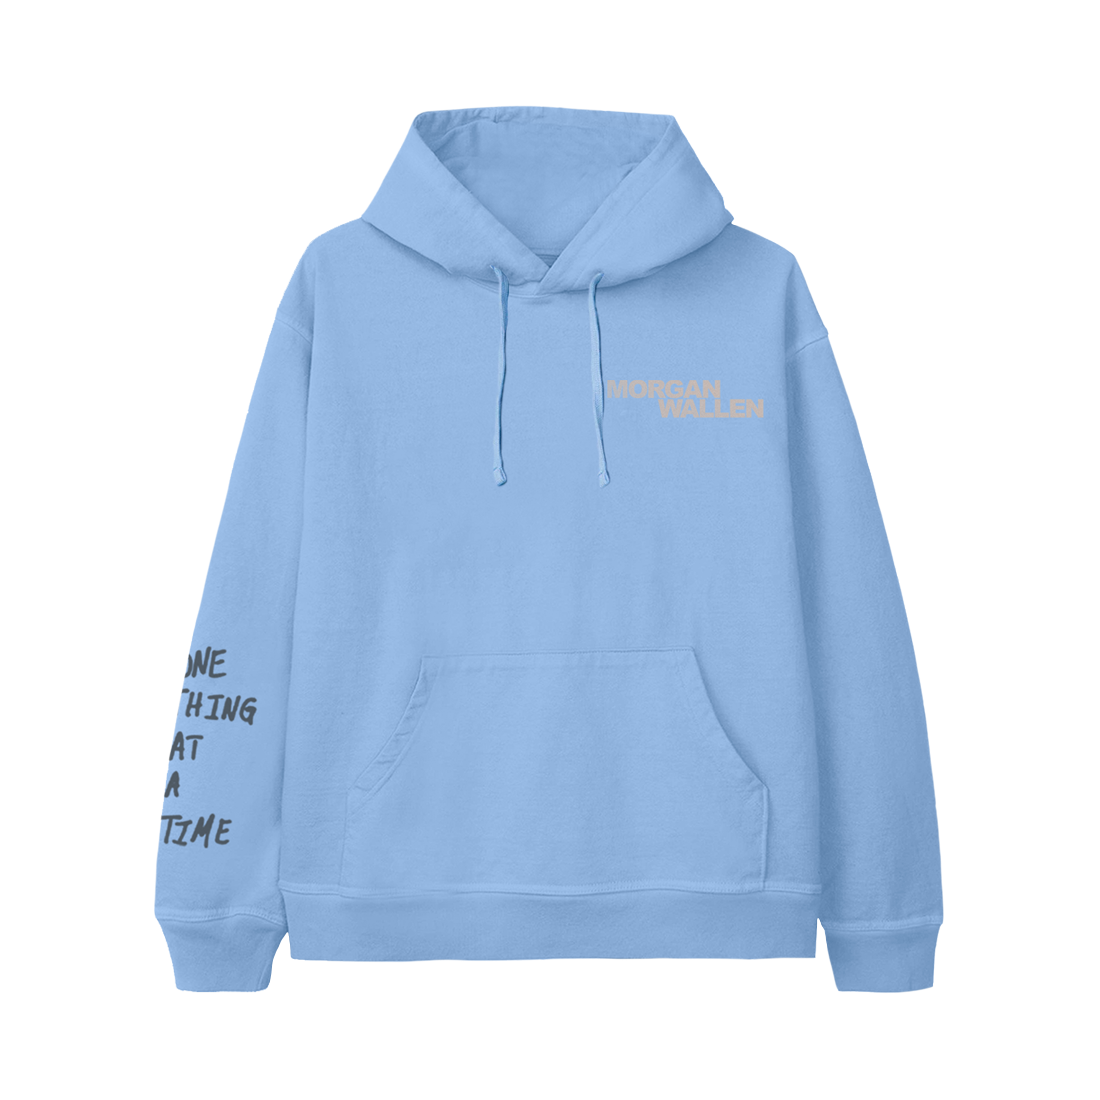 One Thing At A Time Album Cover Blue Hoodie